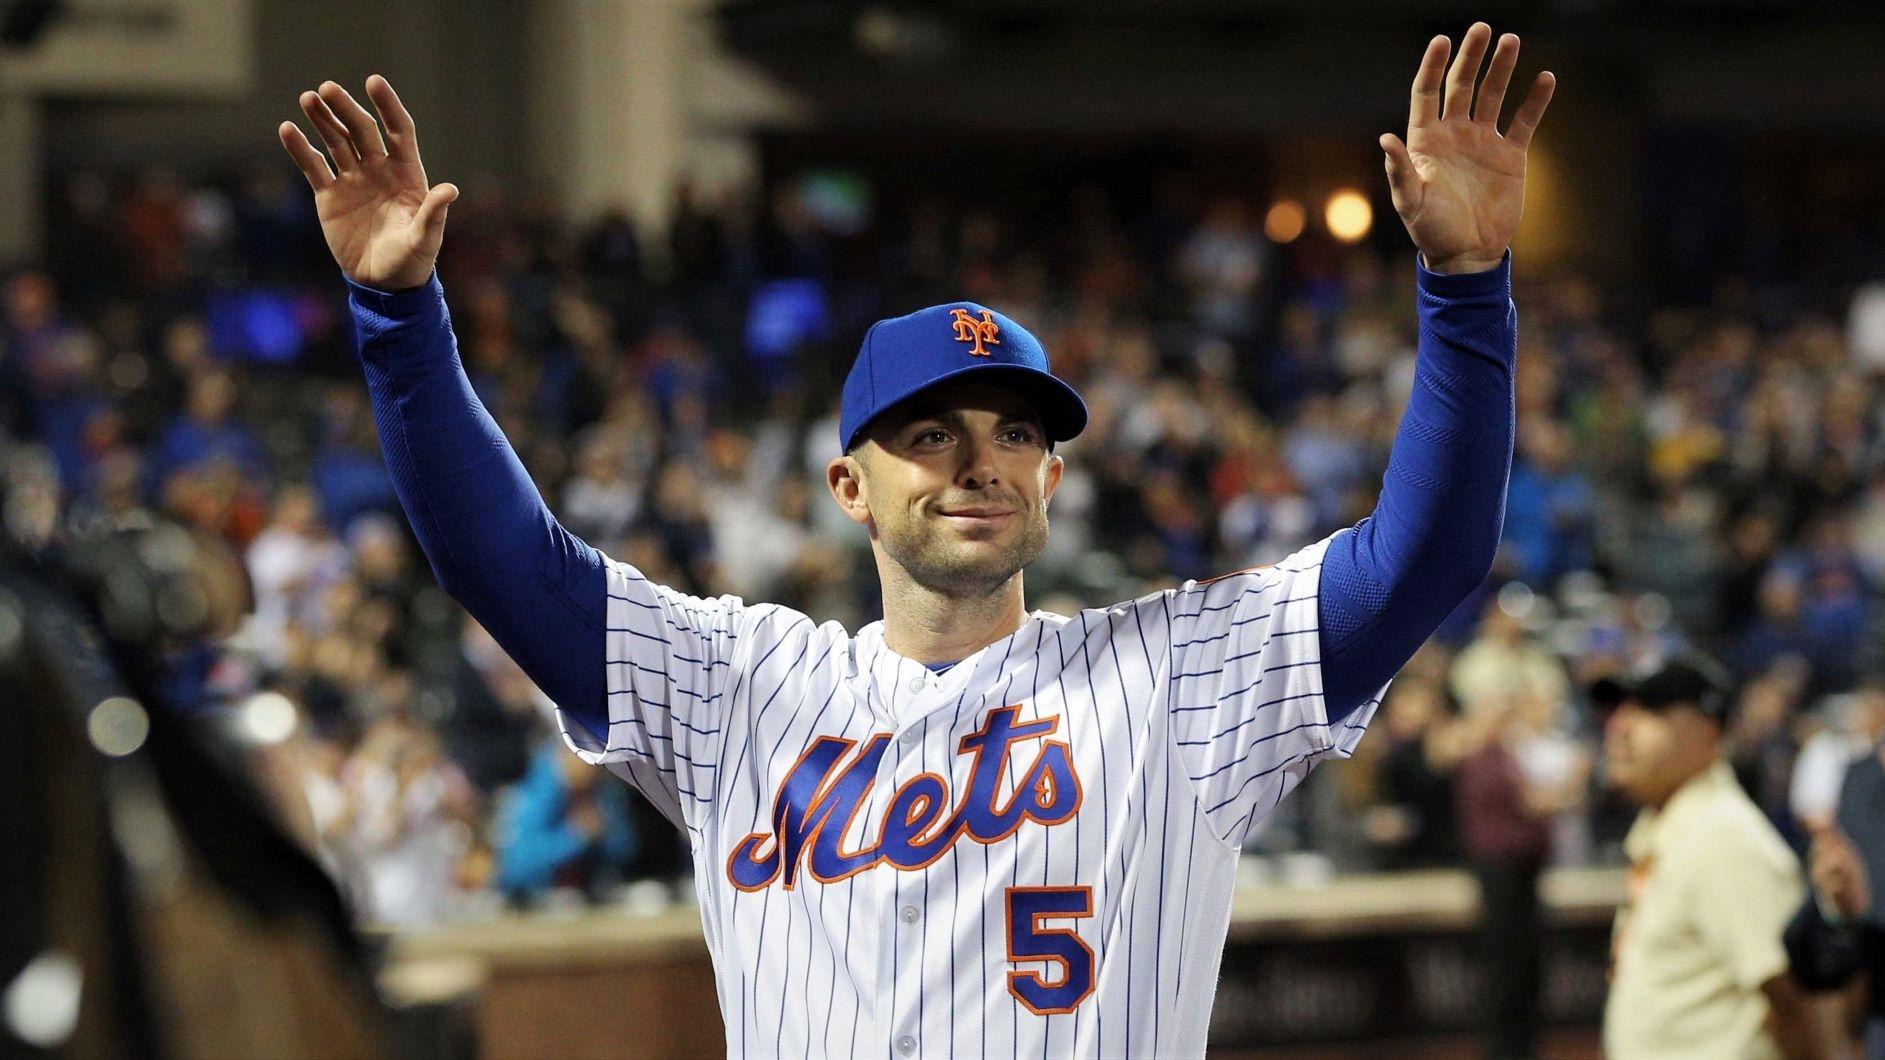 Sep 29, 2018; New York City, NY, USA; New York Mets third baseman David Wright (5) waves to the crowd after a game against the Miami Marlins at Citi Field. / Brad Penner-USA TODAY Sports